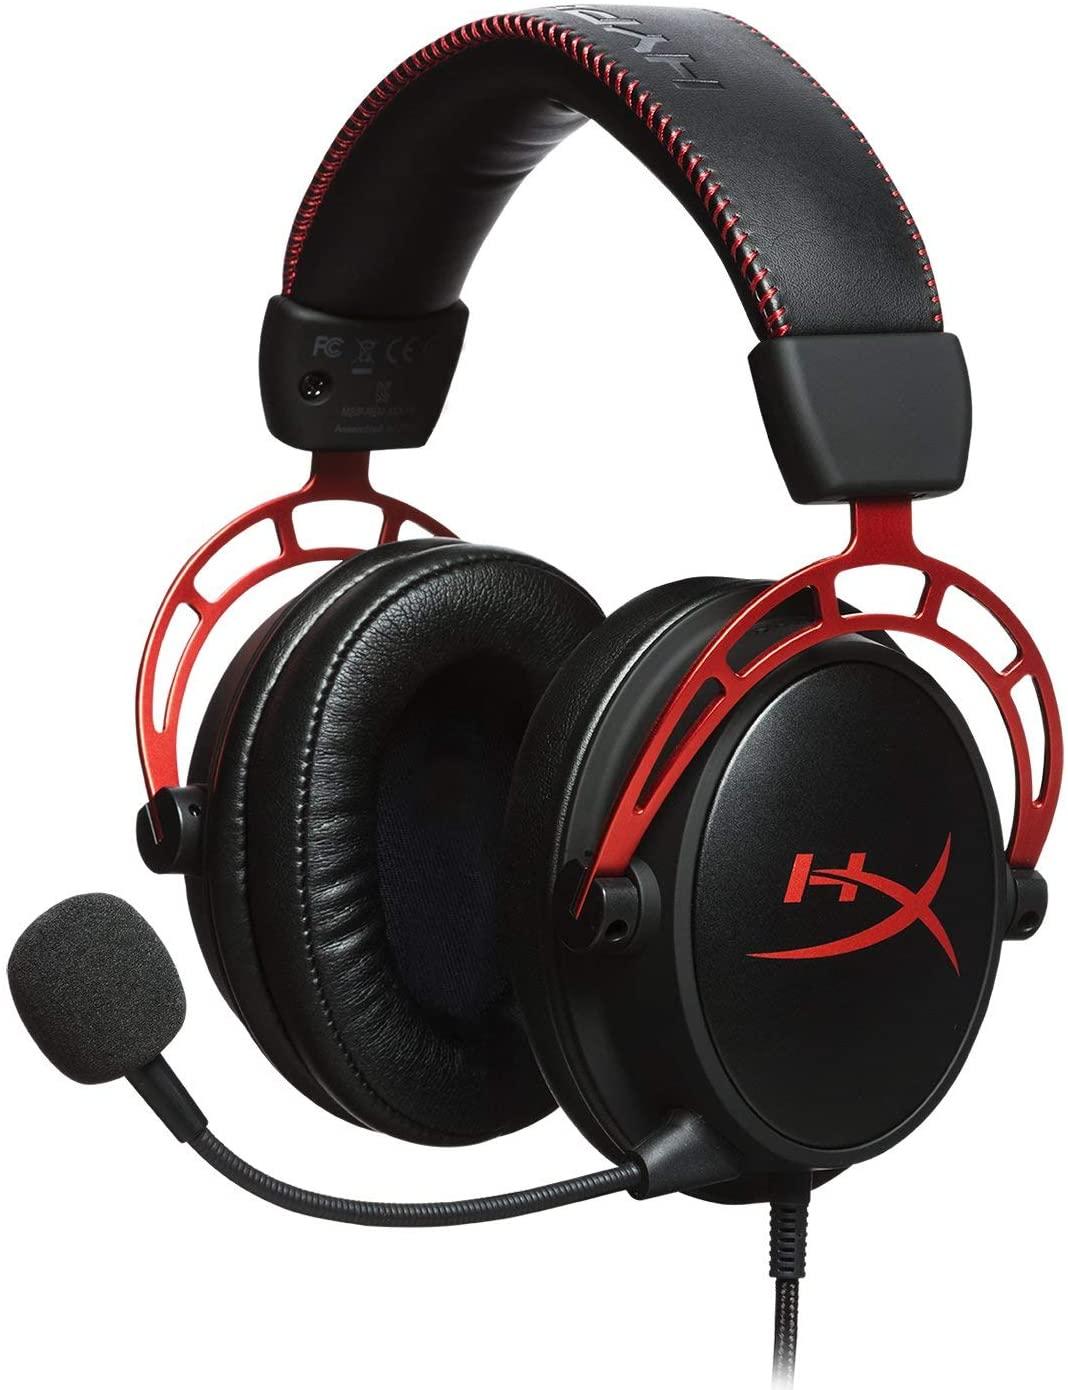 Talk to your team with the HyperX Cloud Alpha Pro headset on sale for $52 today